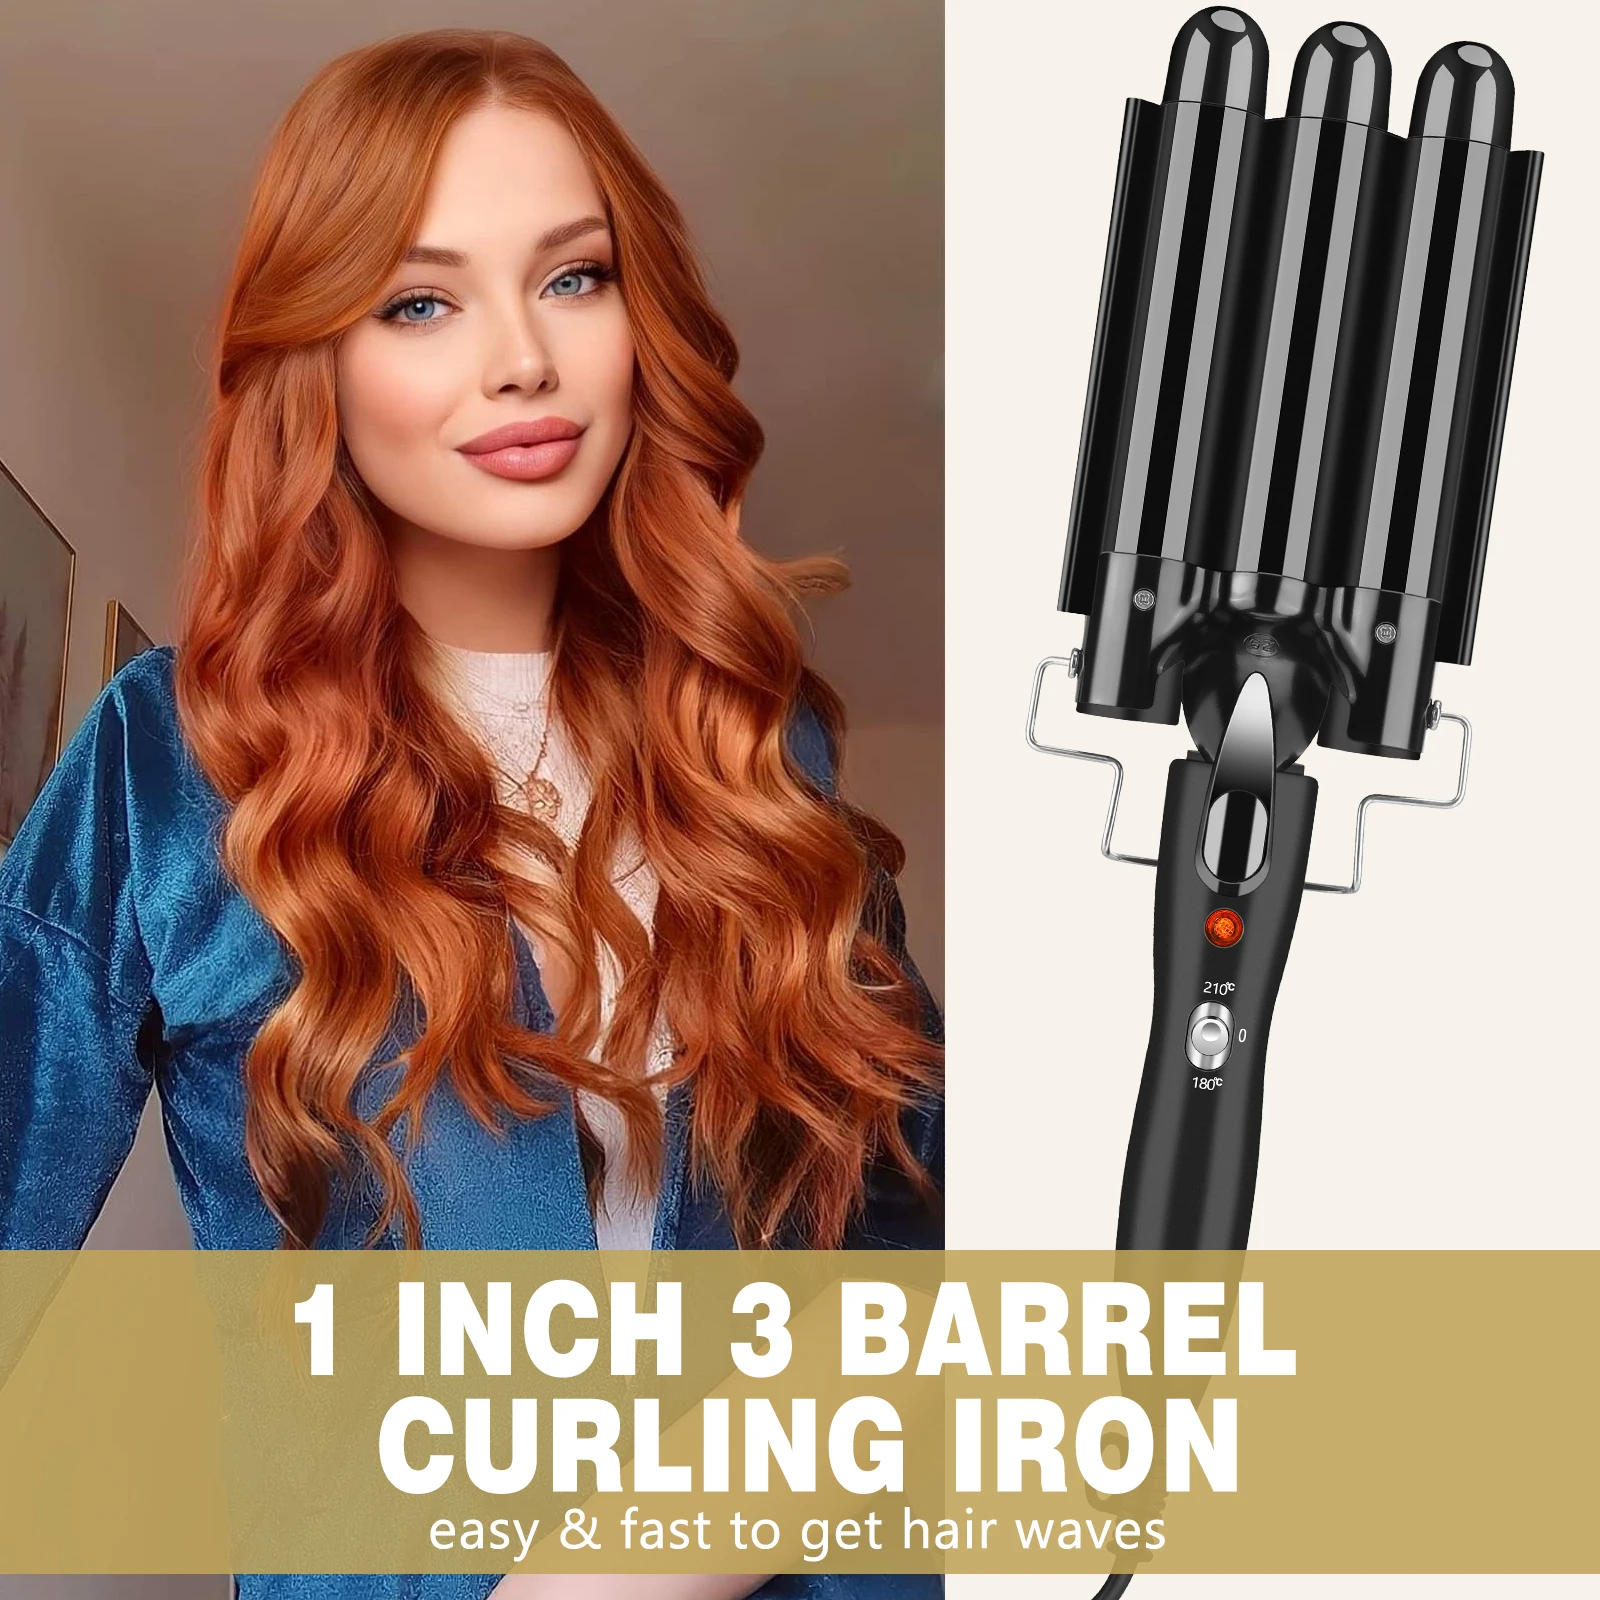 Triple Barrel Curling Wand! How to Get Perfect Hair Waves 🤩 - YouTube